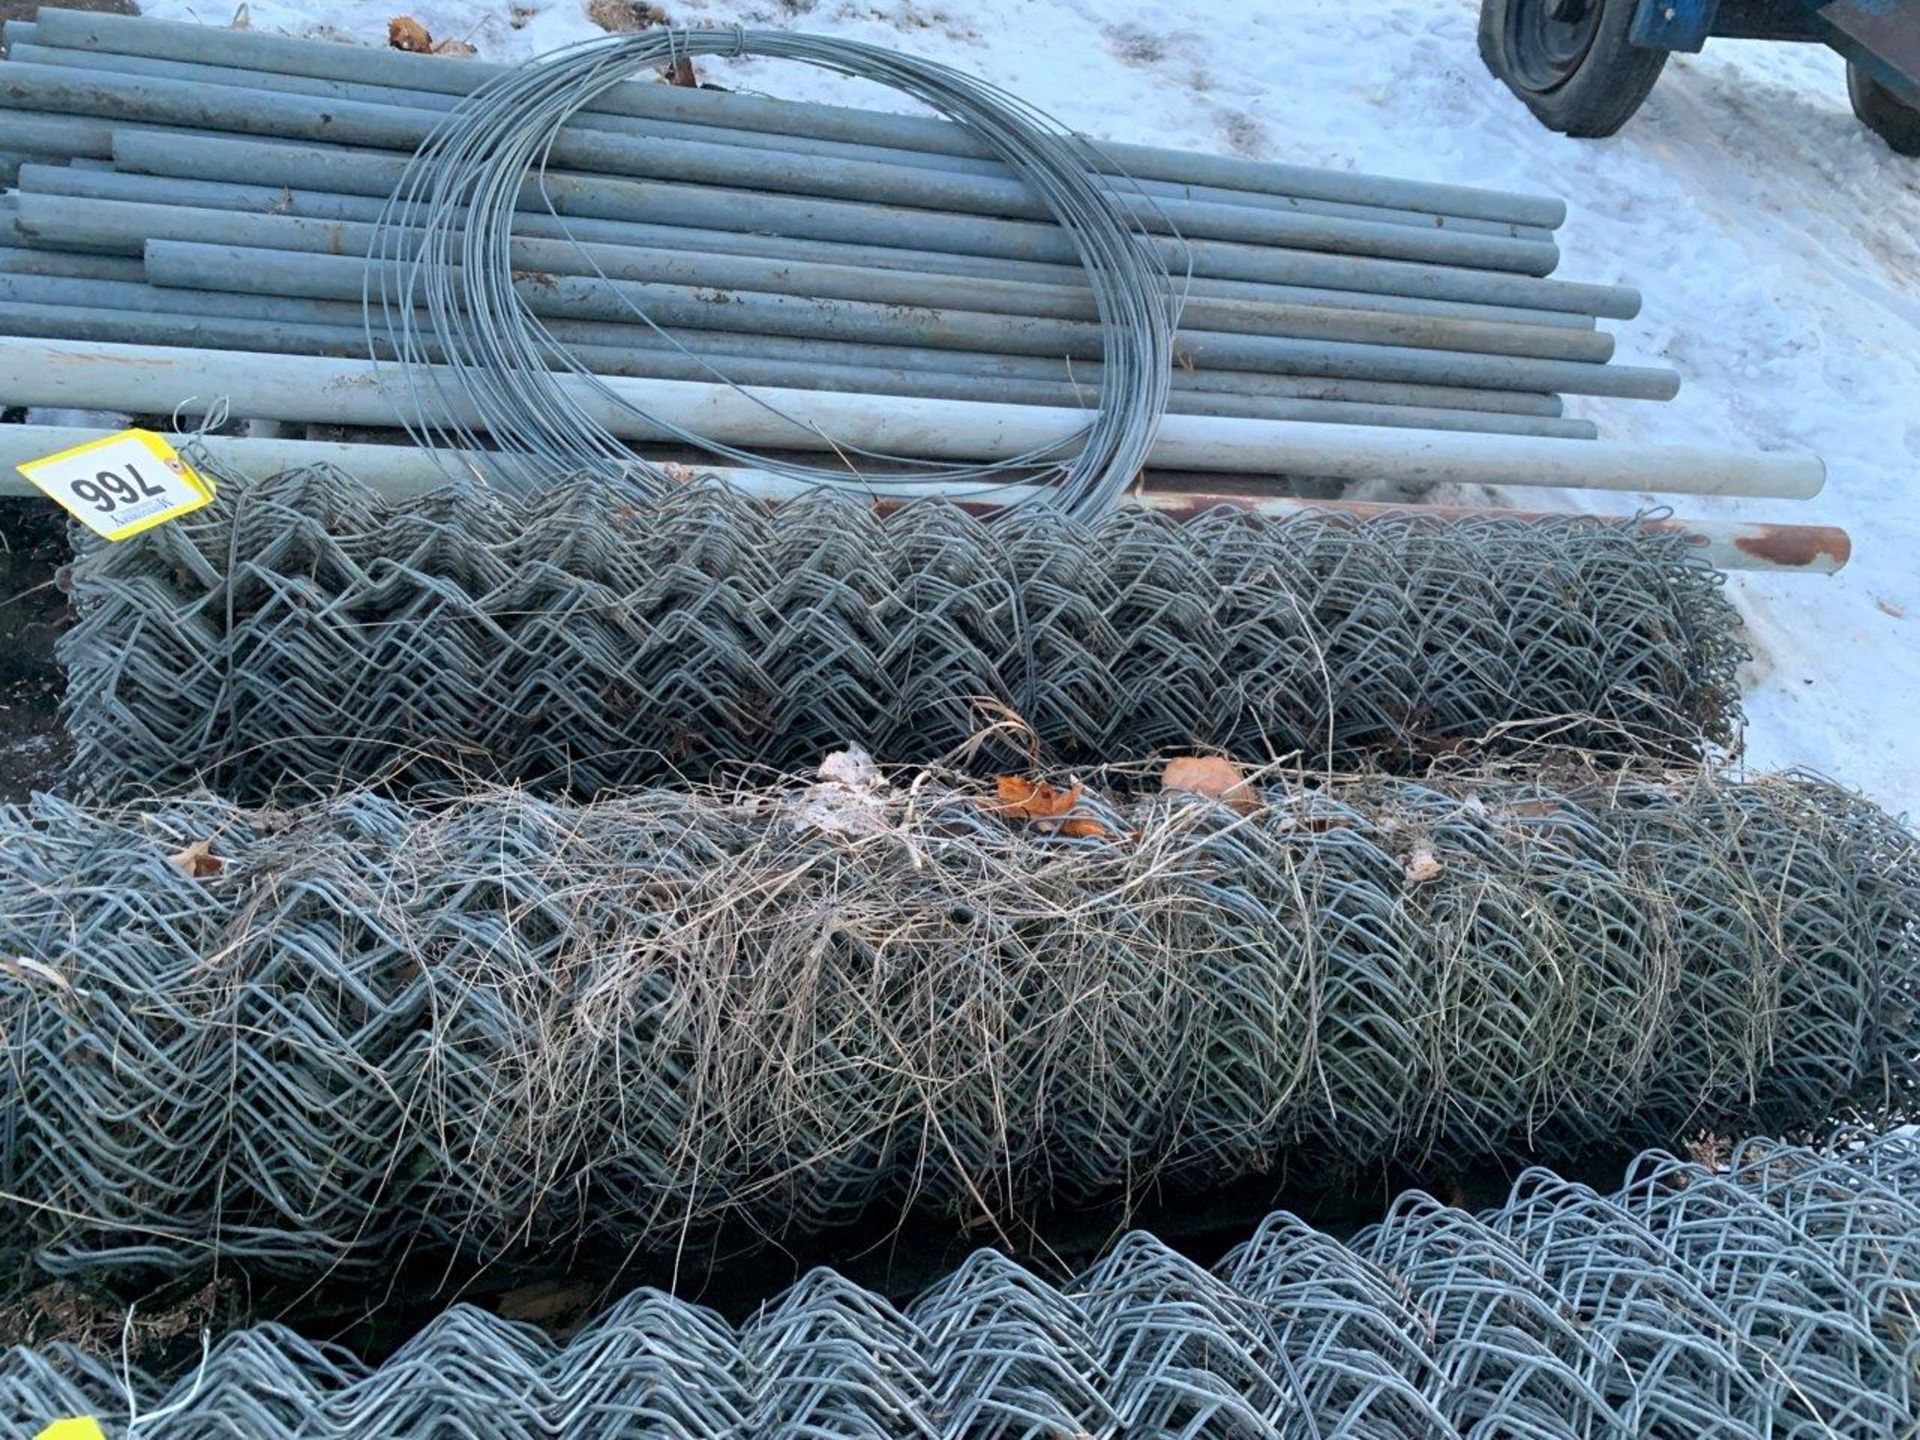 2-ROLLS OF 4FT CHAIN LINK FENCING MESH - Image 2 of 2